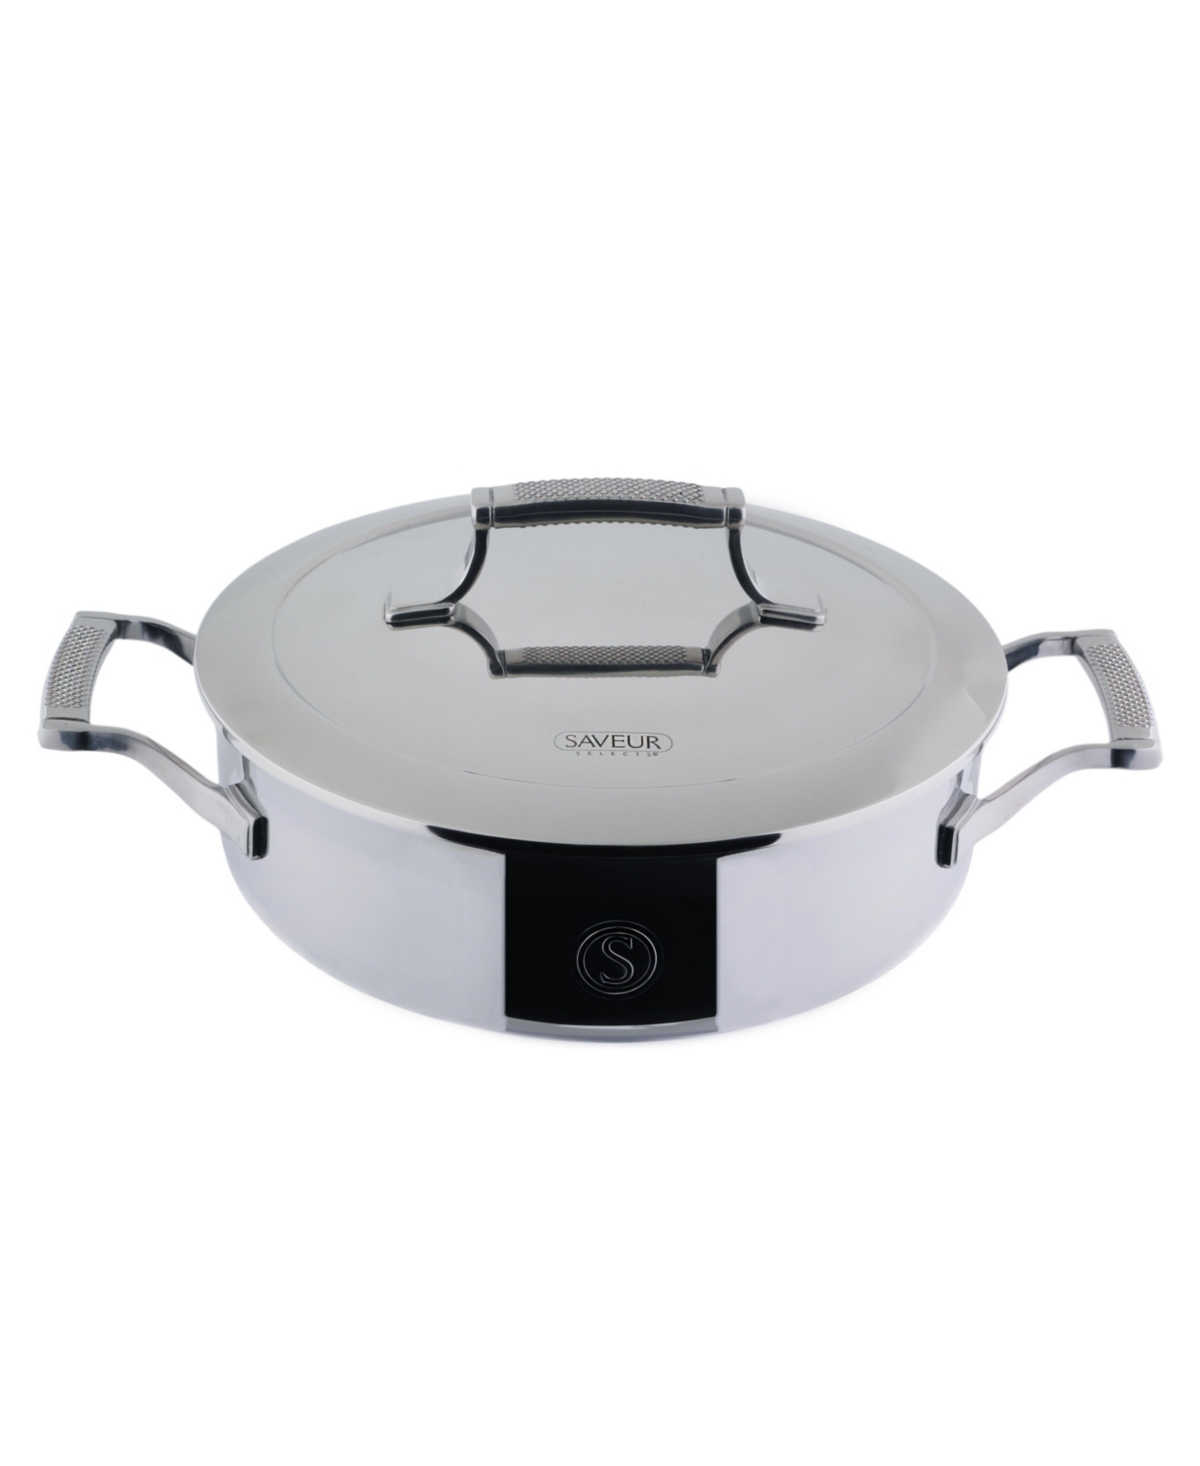 Saveur Selects Voyage Series 3-qt. Tri-ply Sauteuse In Silver